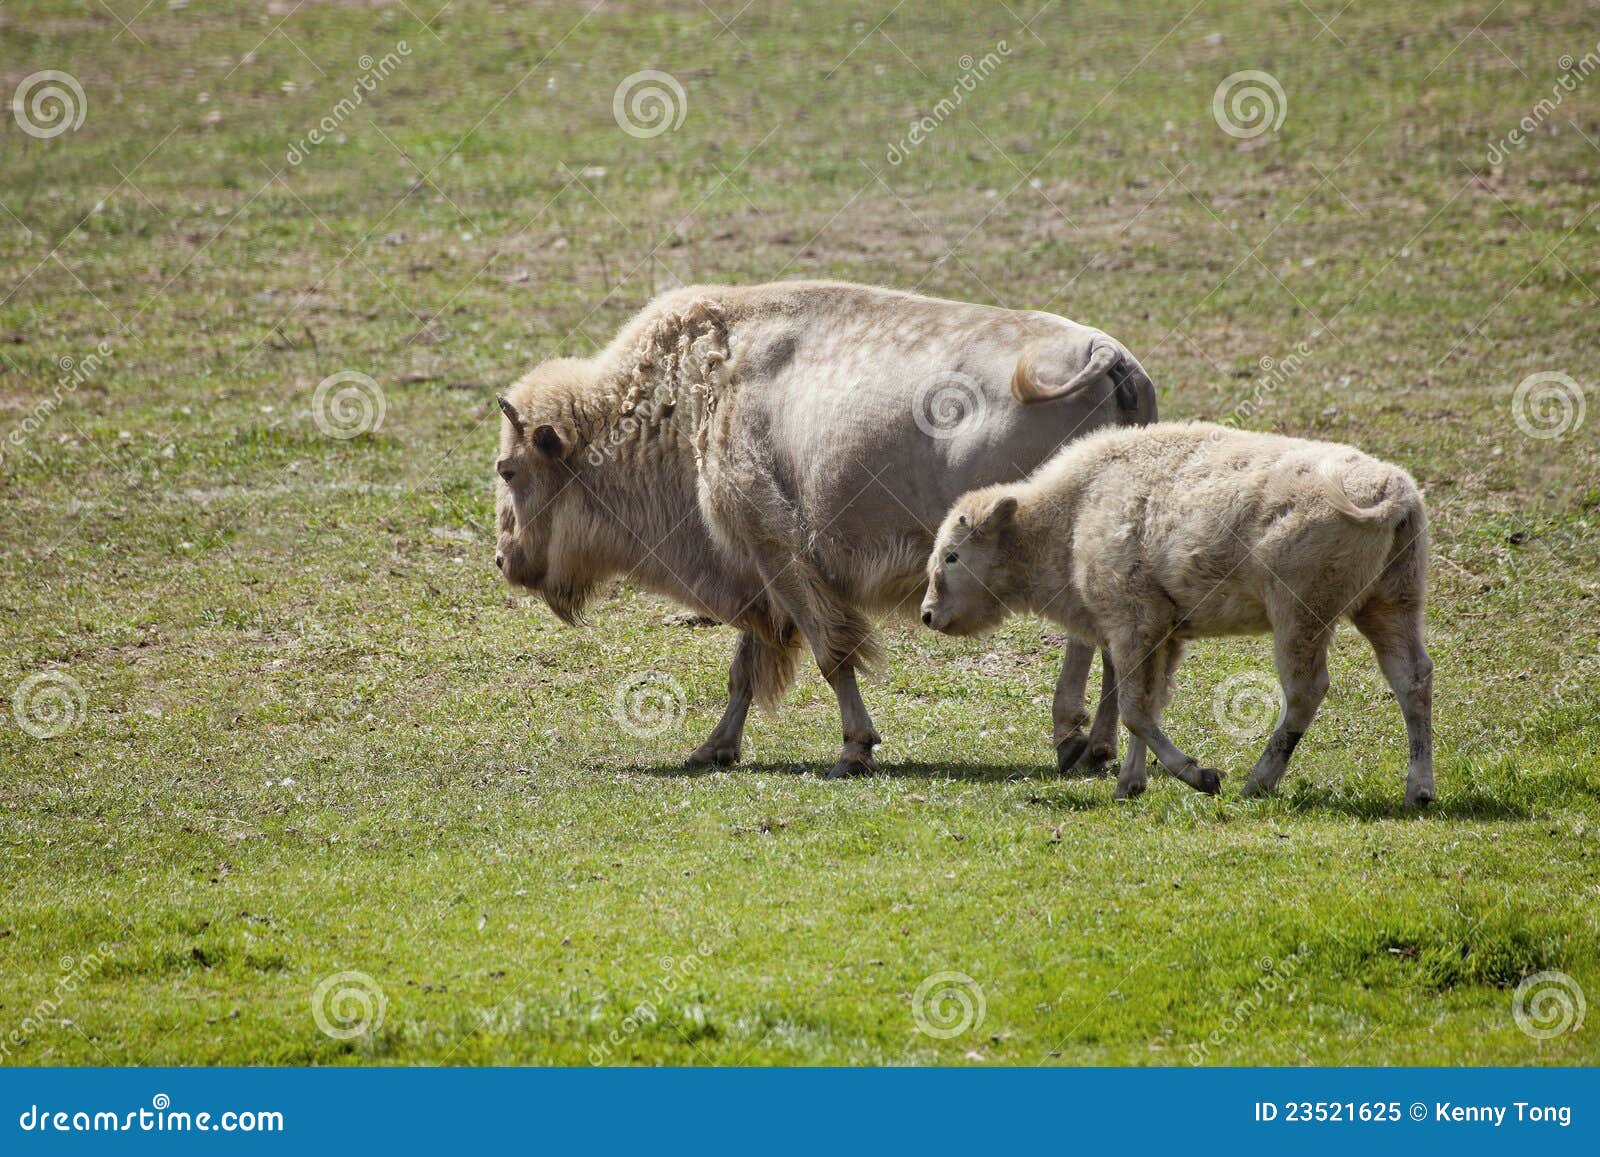 white american bison and baby grazing in a field